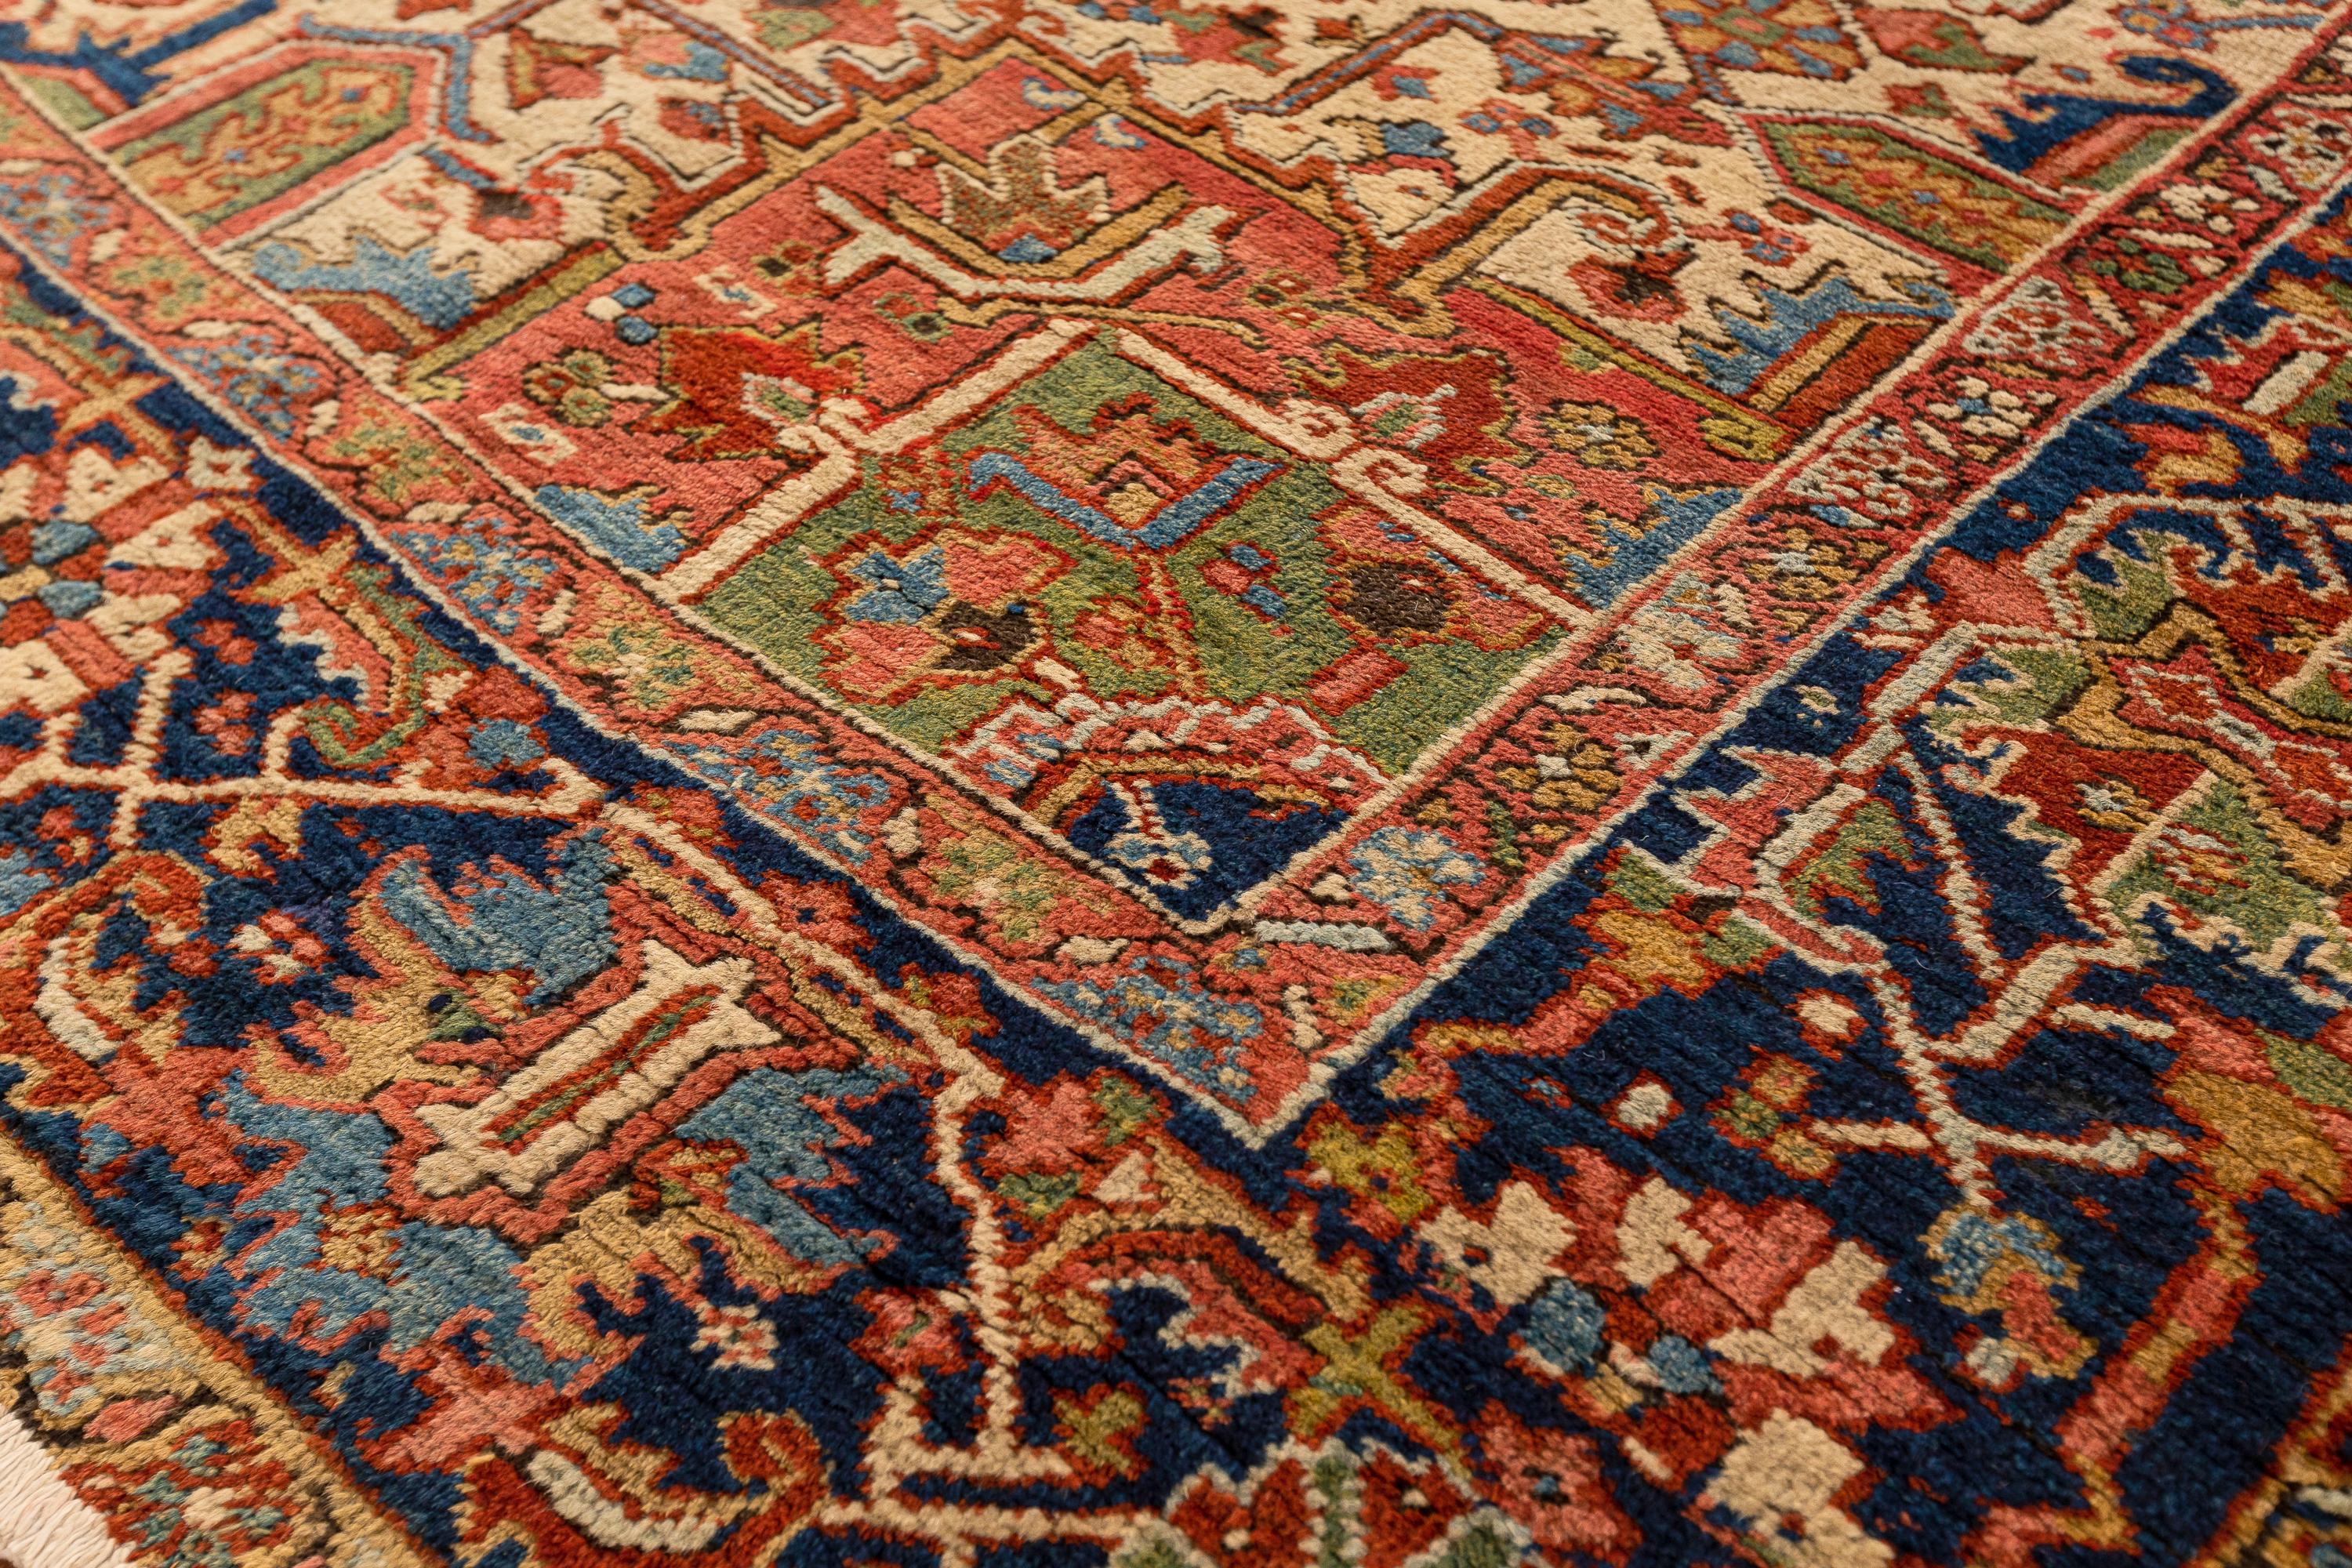 Heriz – Northwest Persia

Faithful to the traditional style of ancient Heriz Persian rugs, this masterpiece combines bold colours and designs that produce effects of straight and angular movements. The diagonal lines and rigid strokes arranged